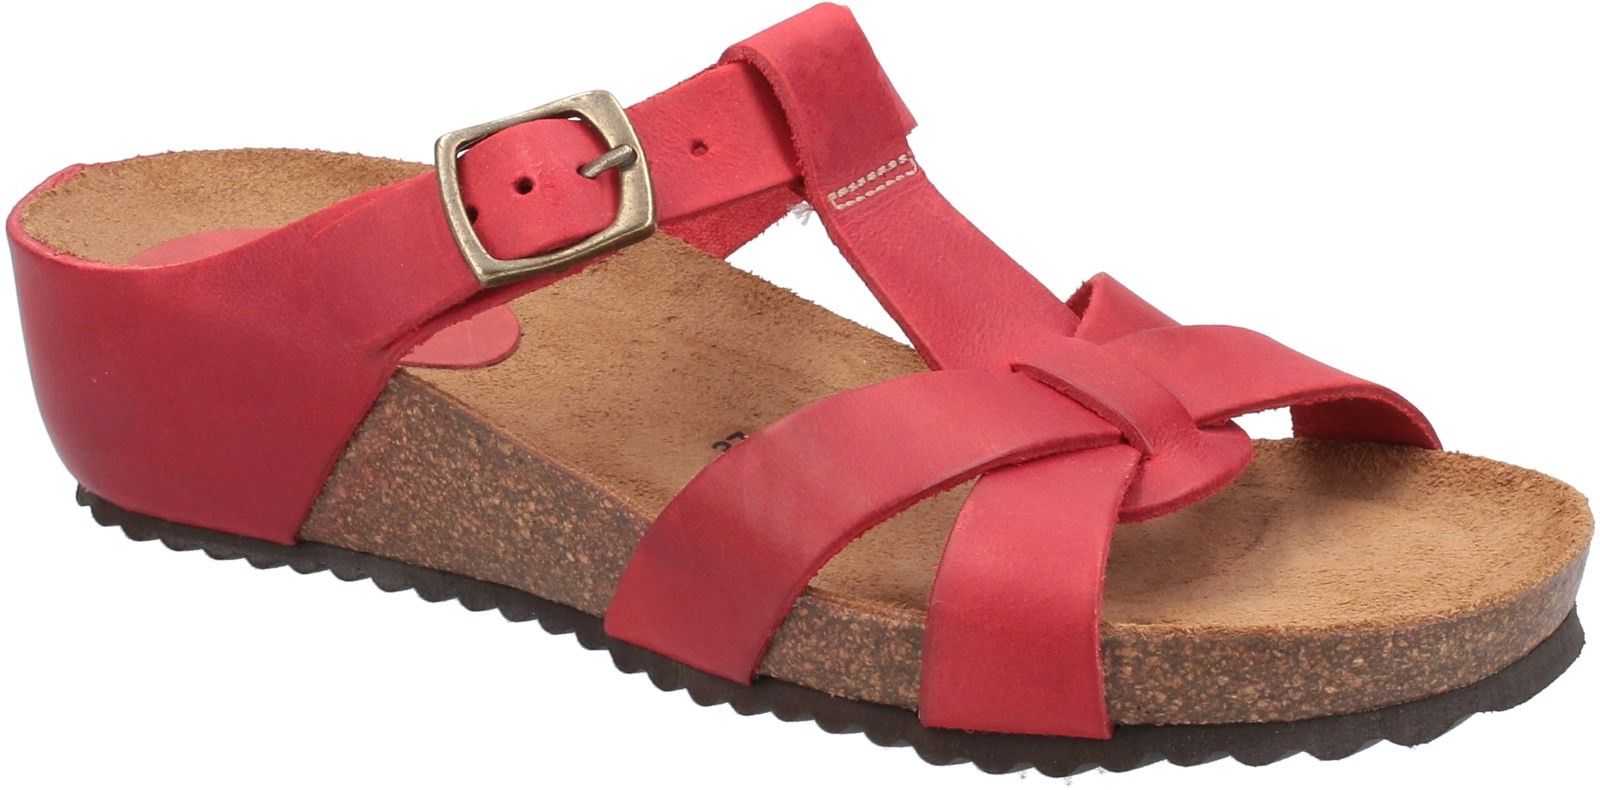 Riva Cerbere is a womens T Bar design slip on sandal with leather uppers in comfortable low wedge platform design.